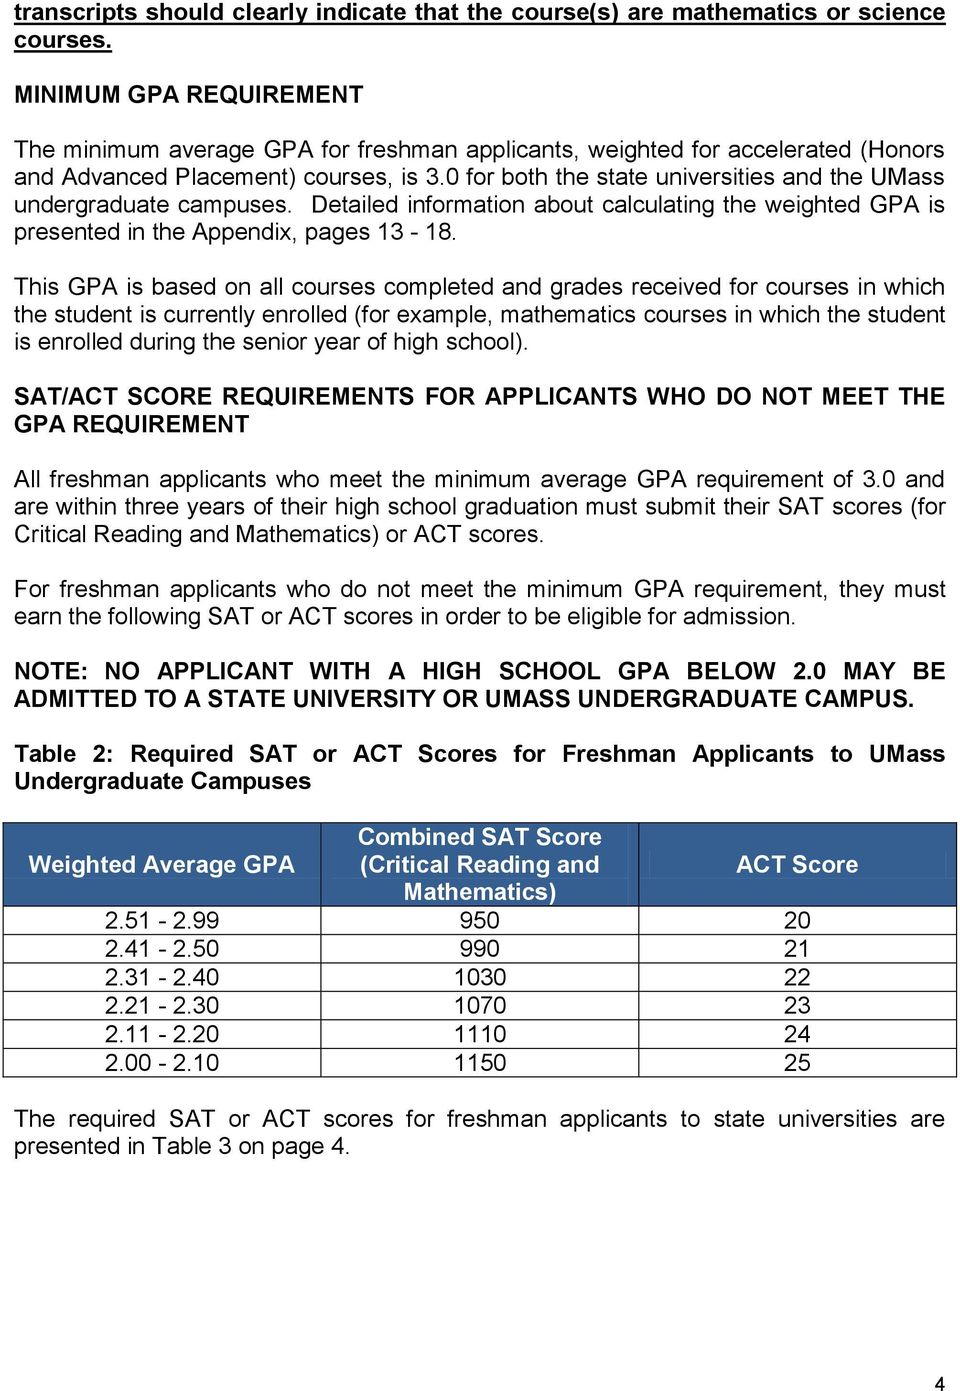 0 for both the state universities and the UMass undergraduate campuses. Detailed information about calculating the weighted GPA is presented in the Appendix, pages 13-18.